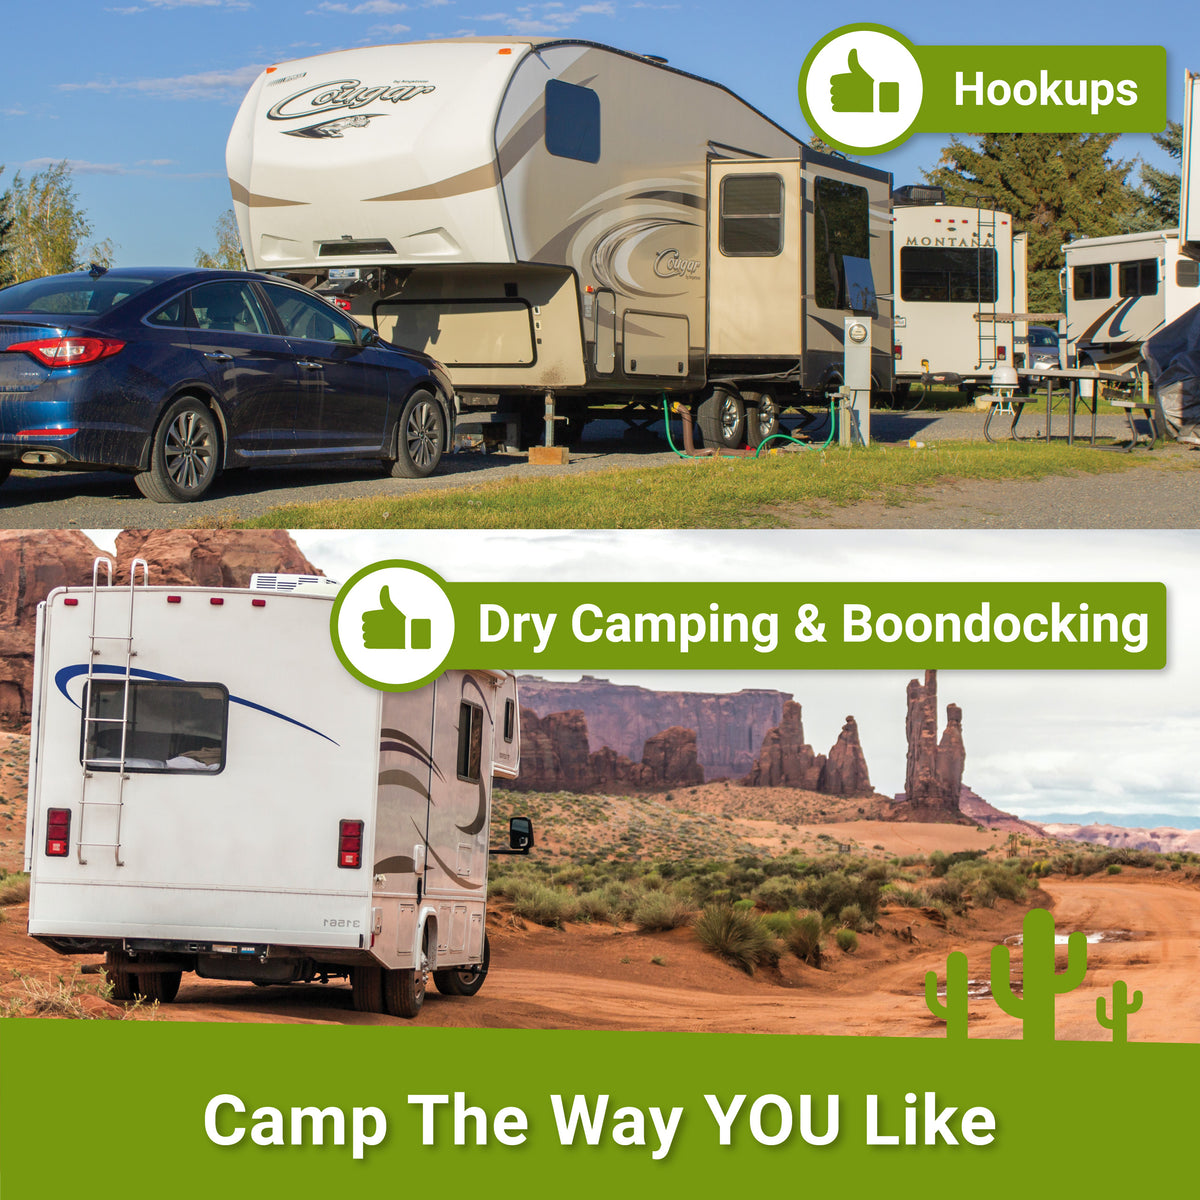 RV Digest-It Drop-In Pods work great whether you&#39;re on hookups or dry camping/boondocking.